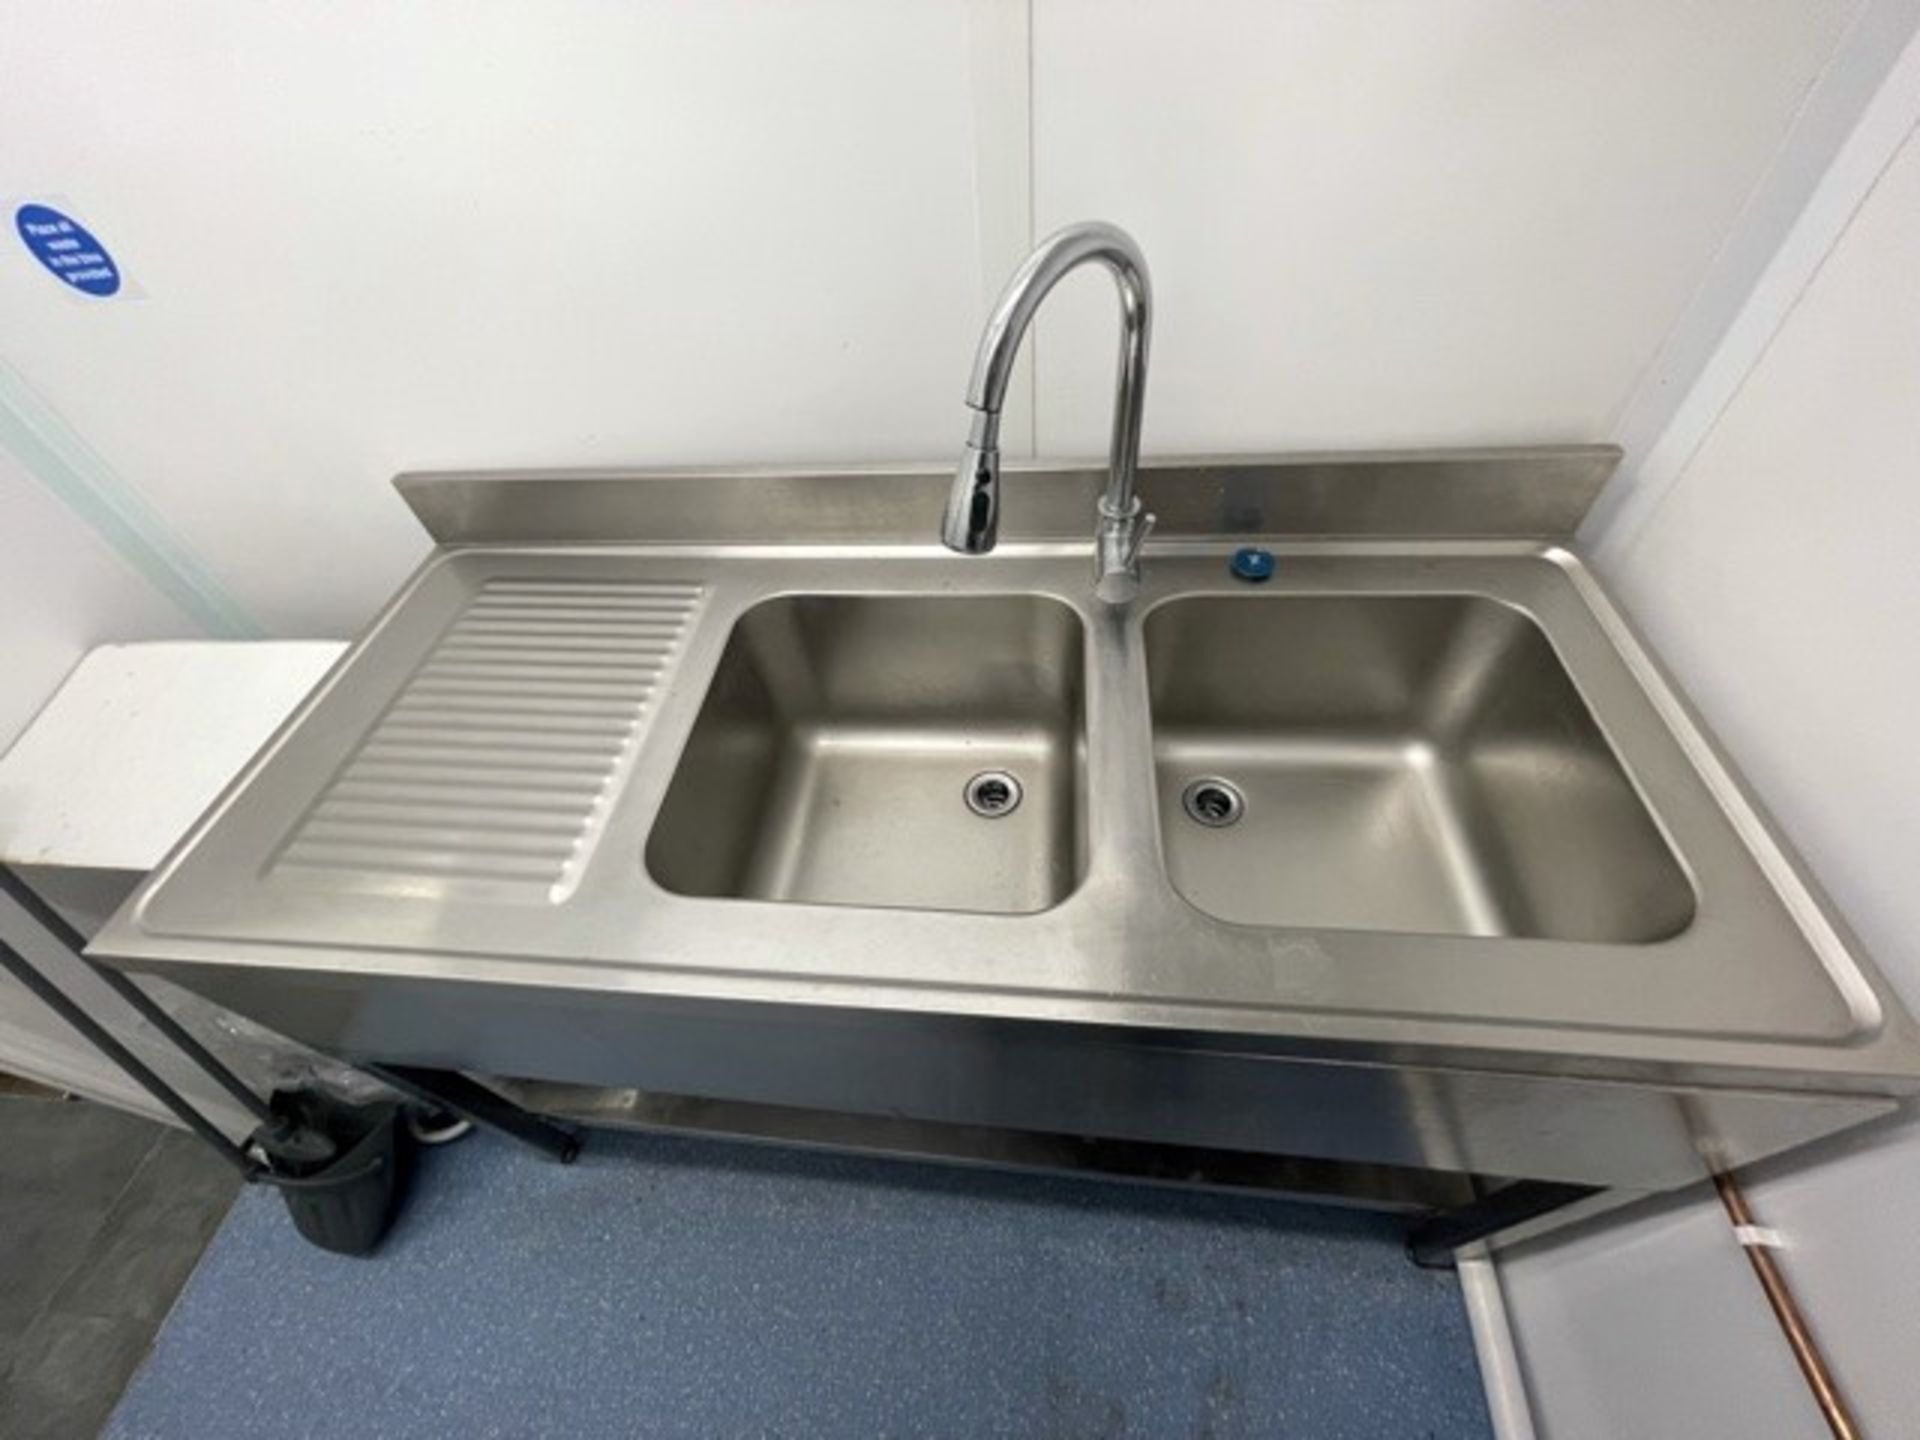 Commercial Sink Stainless Steel 2 Bowls Including - Image 3 of 5